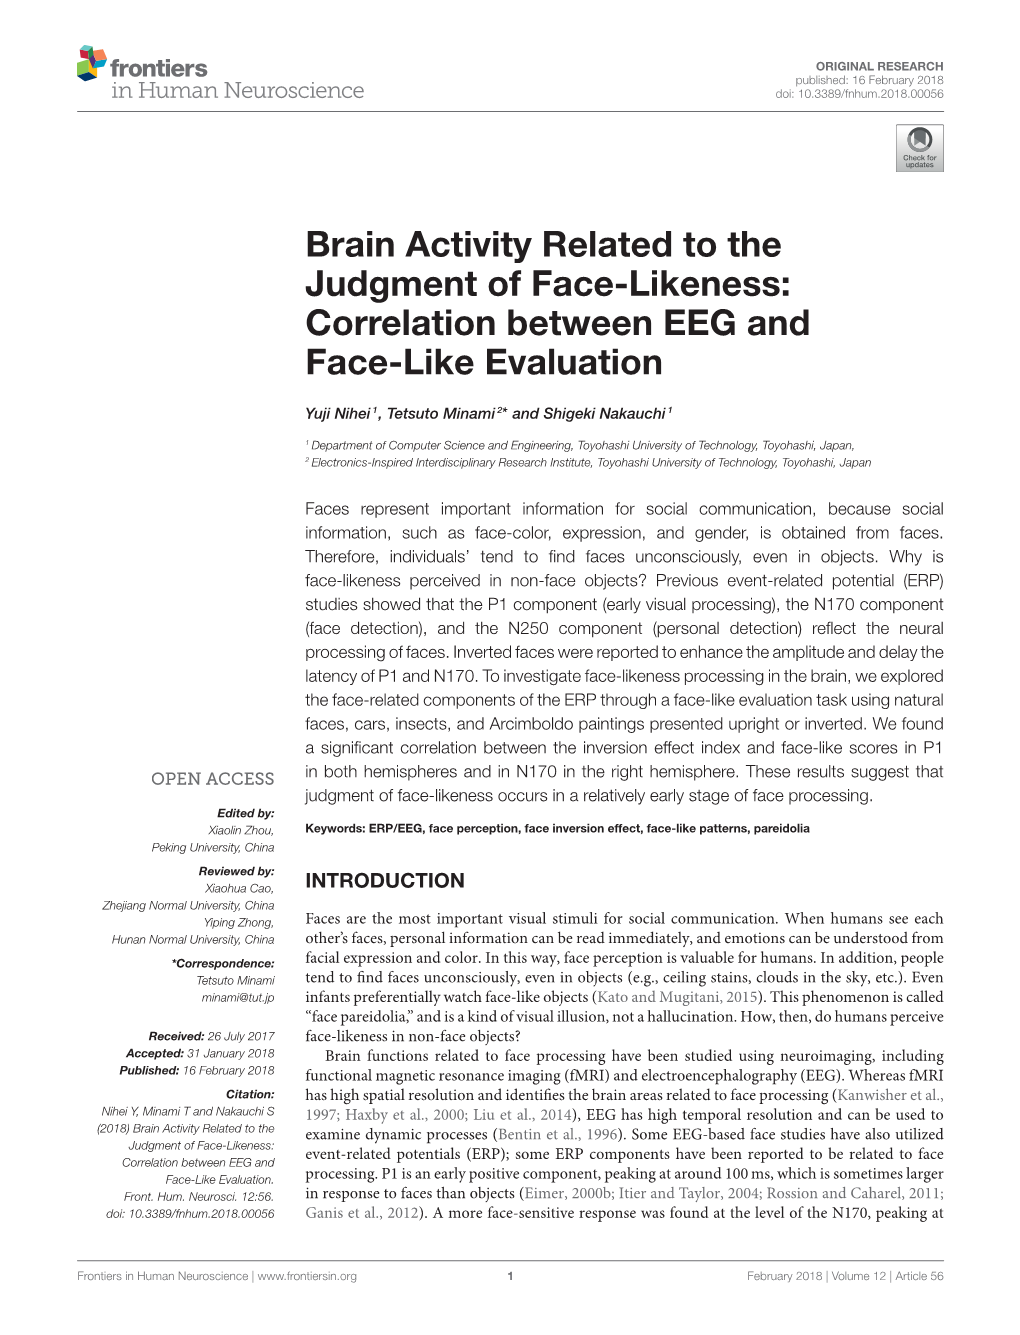 Brain Activity Related to the Judgment of Face-Likeness: Correlation Between EEG and Face-Like Evaluation